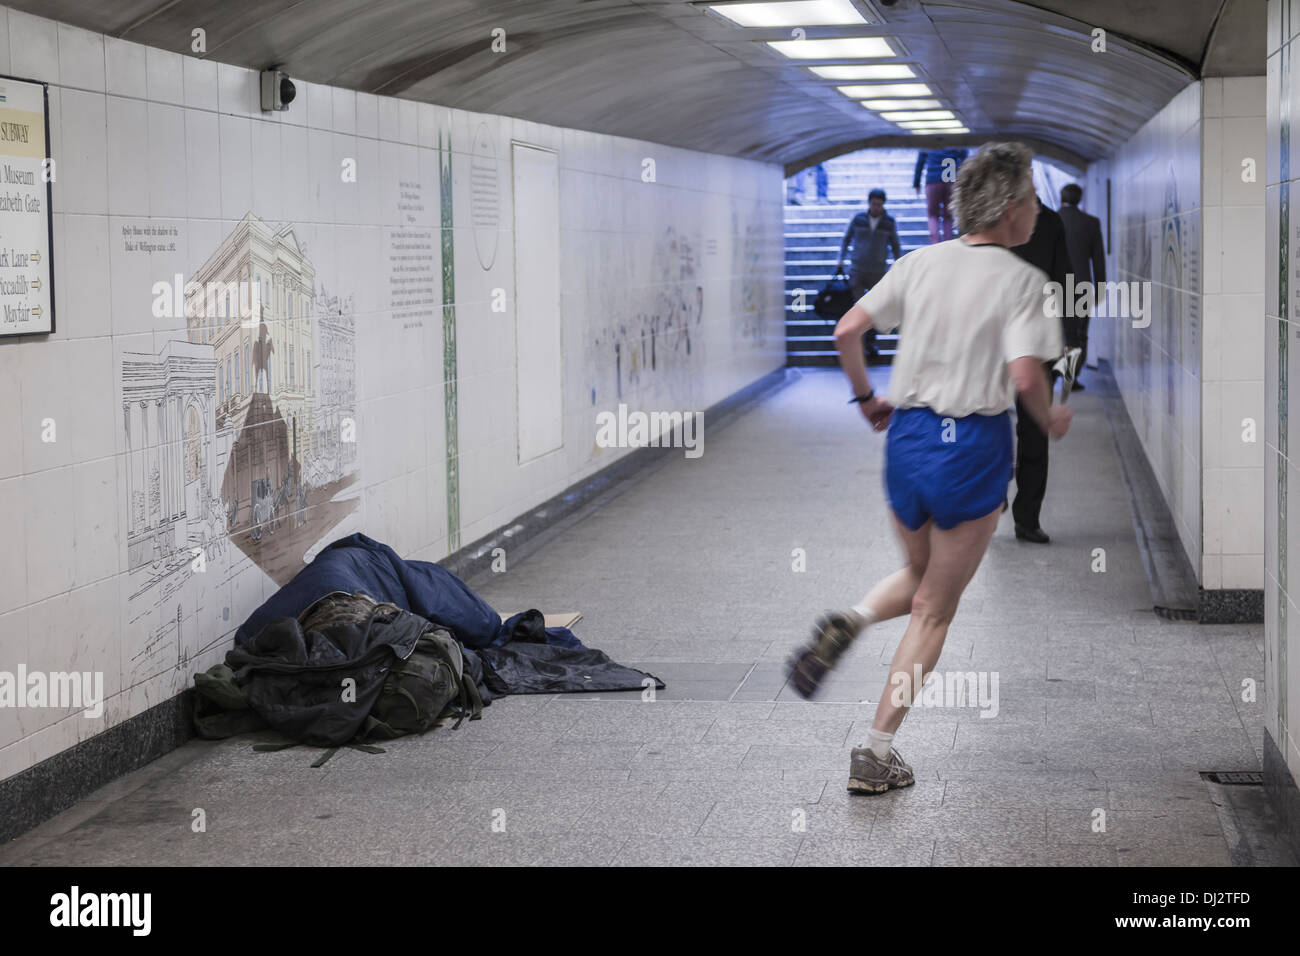 A jogger passes a man sleeping rough in a central London subway. Stock Photo